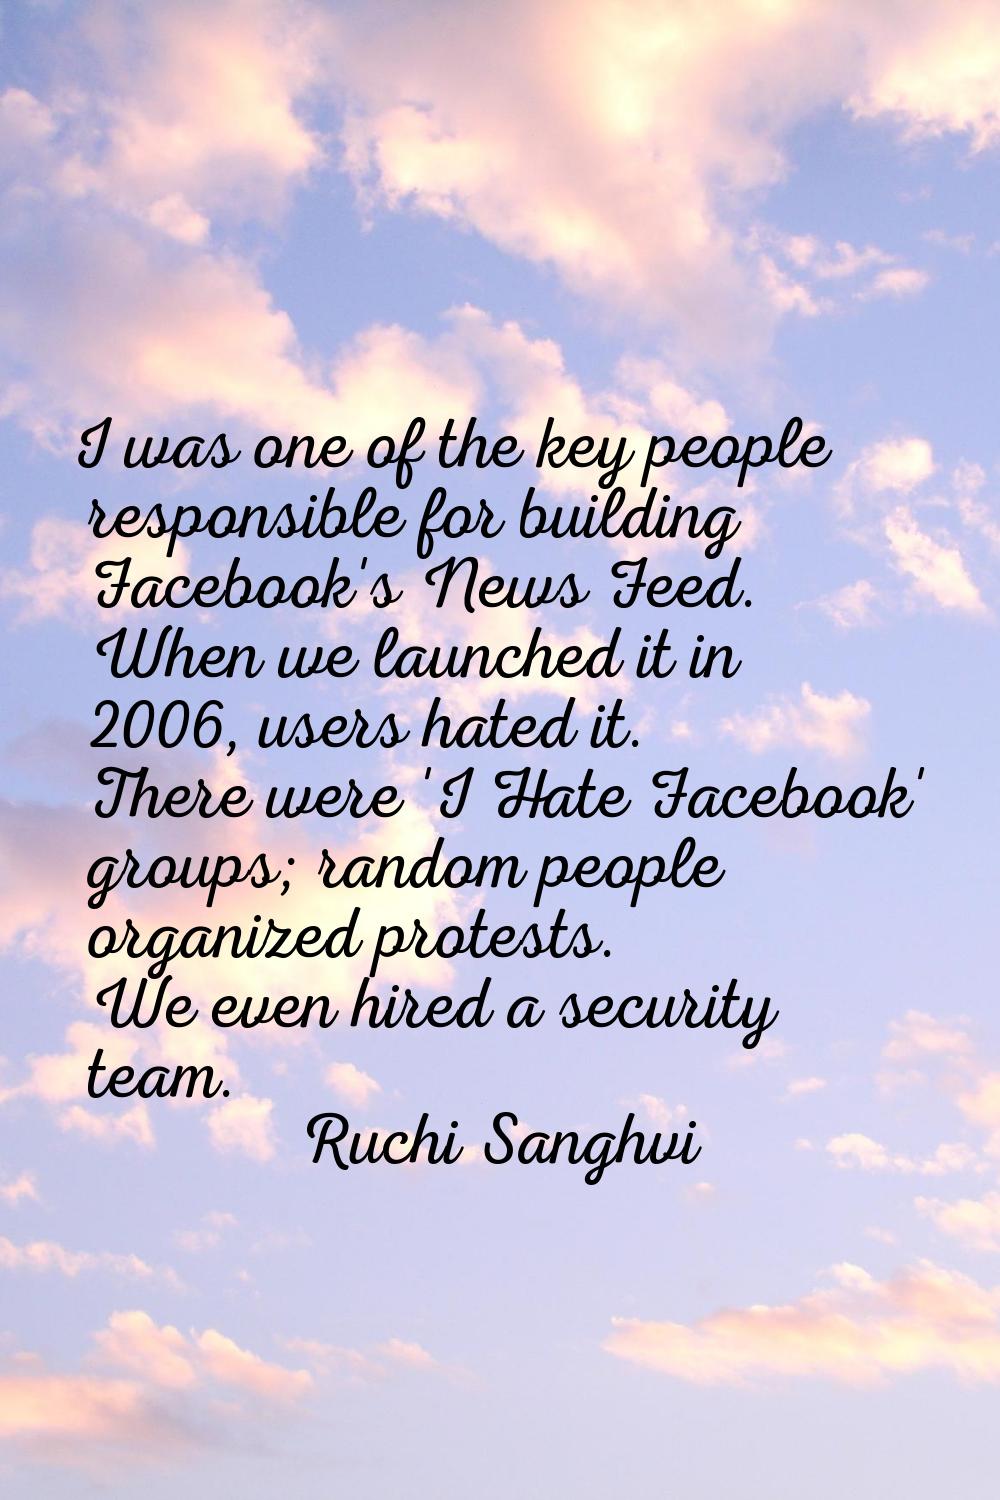 I was one of the key people responsible for building Facebook's News Feed. When we launched it in 2